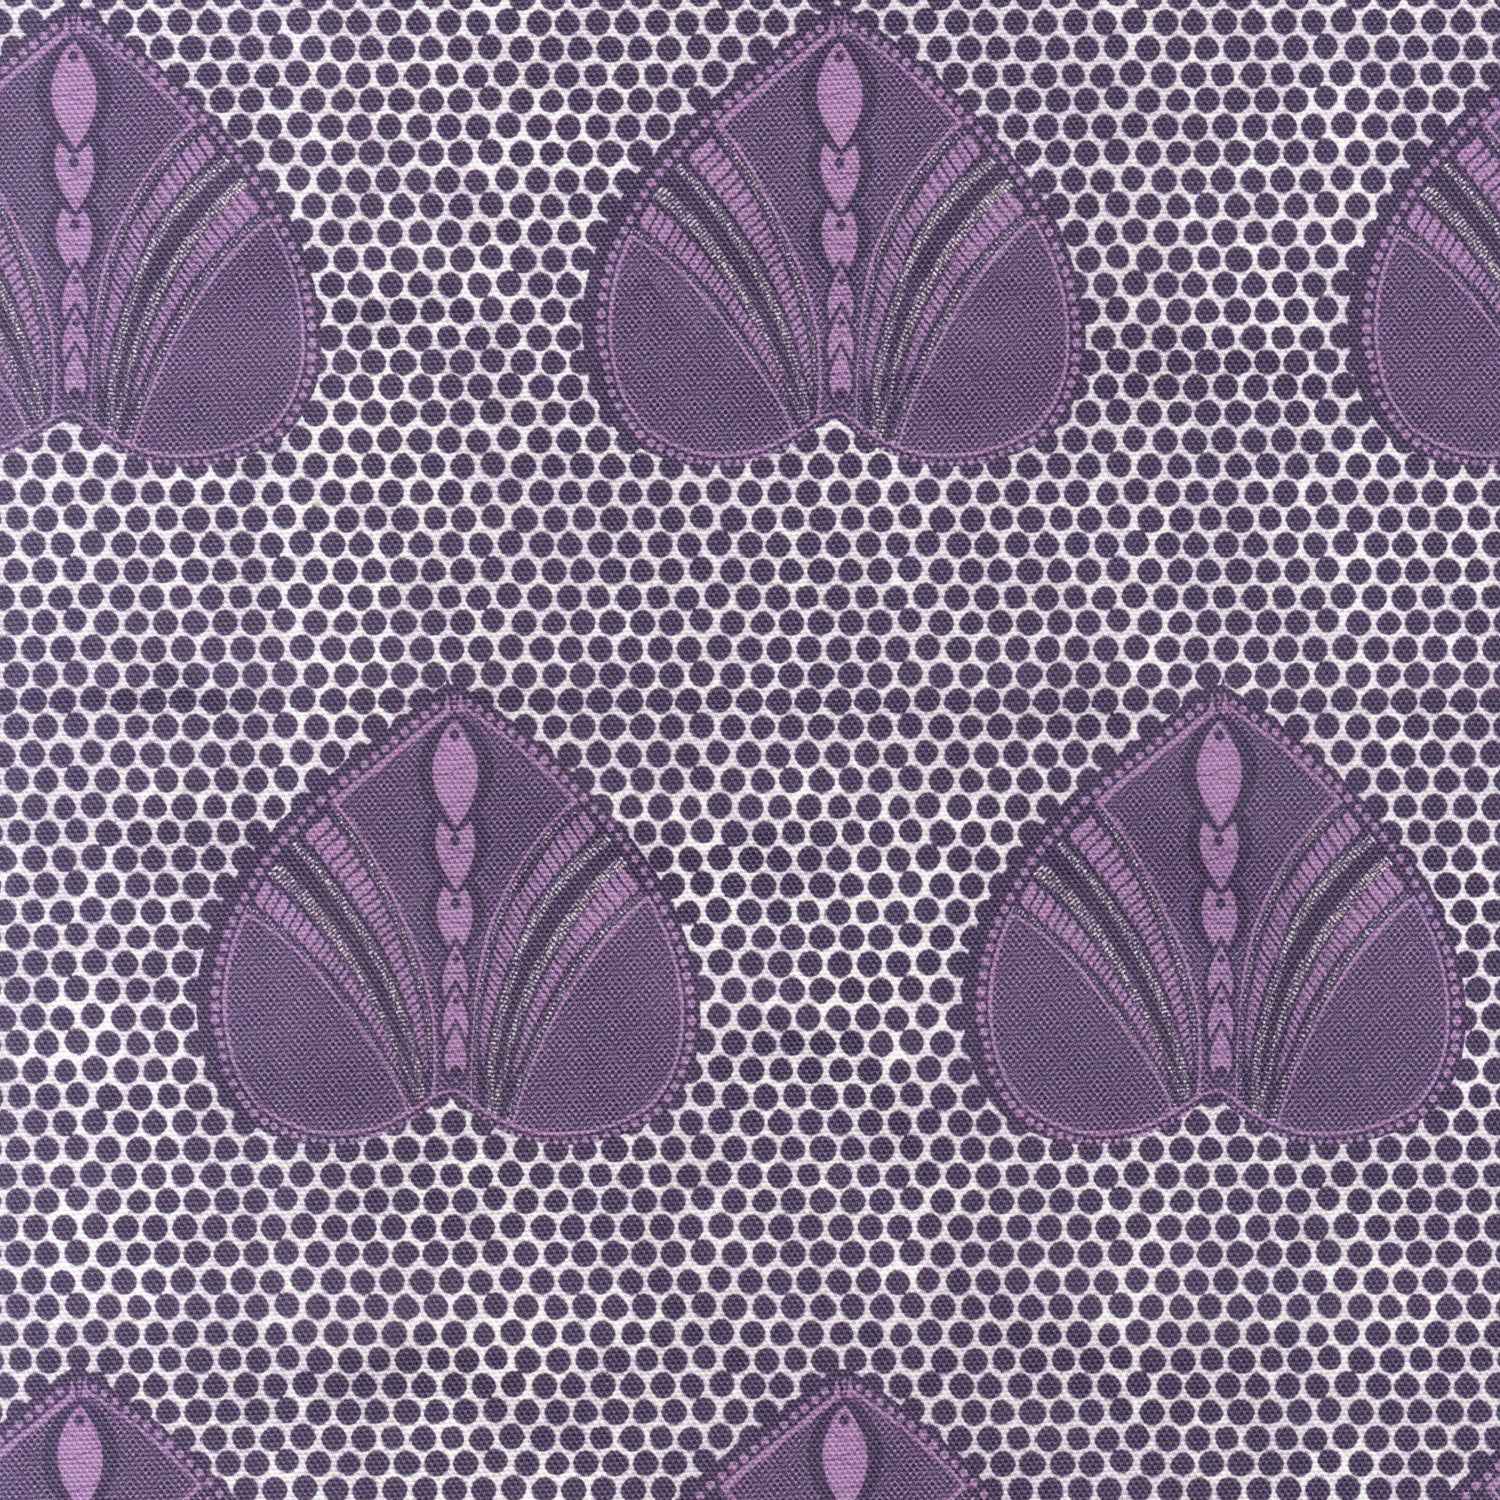 Detail of fabric in a geometric heart print in purple and black on a light purple field.